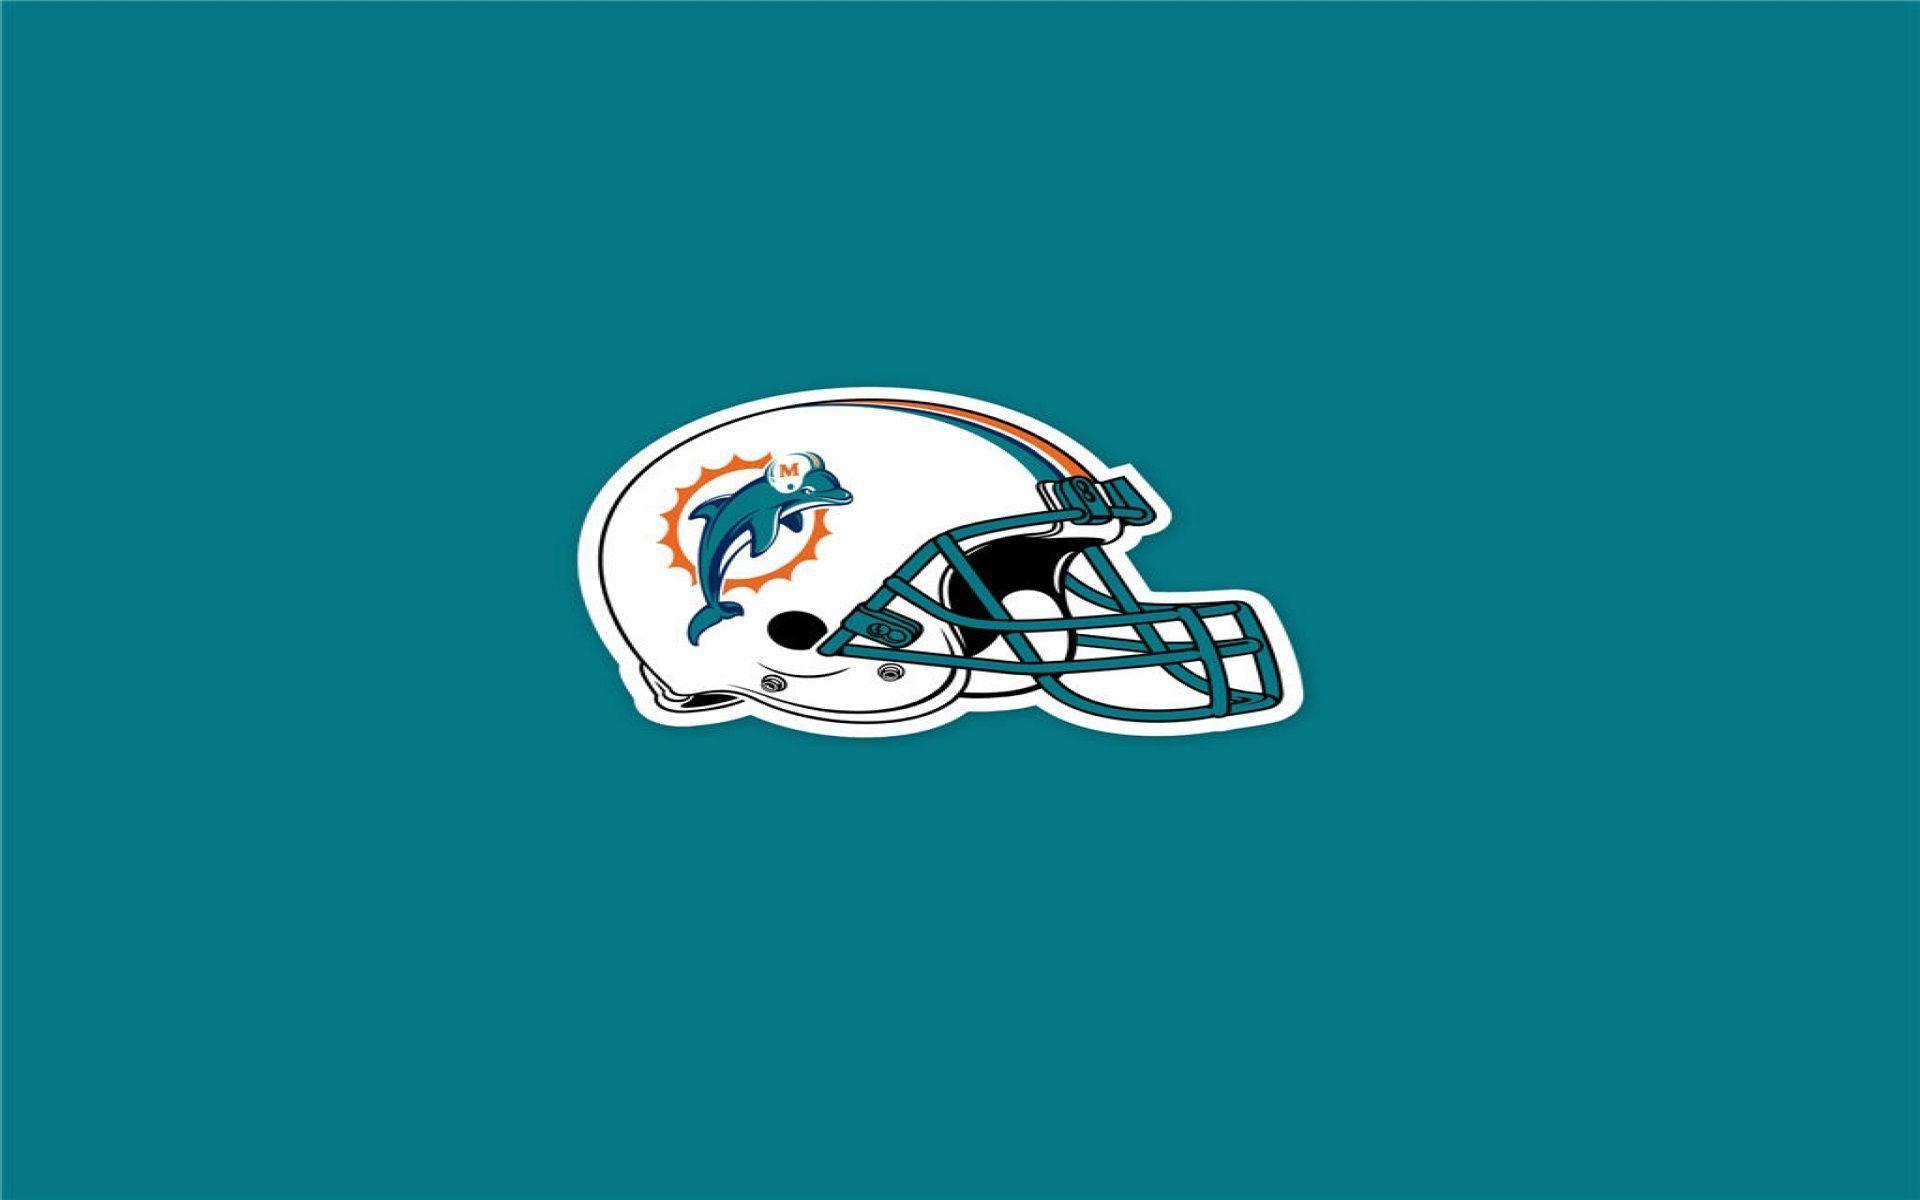 Miami Dolphins Wallpaper HD. Wallpaper, Background, Image